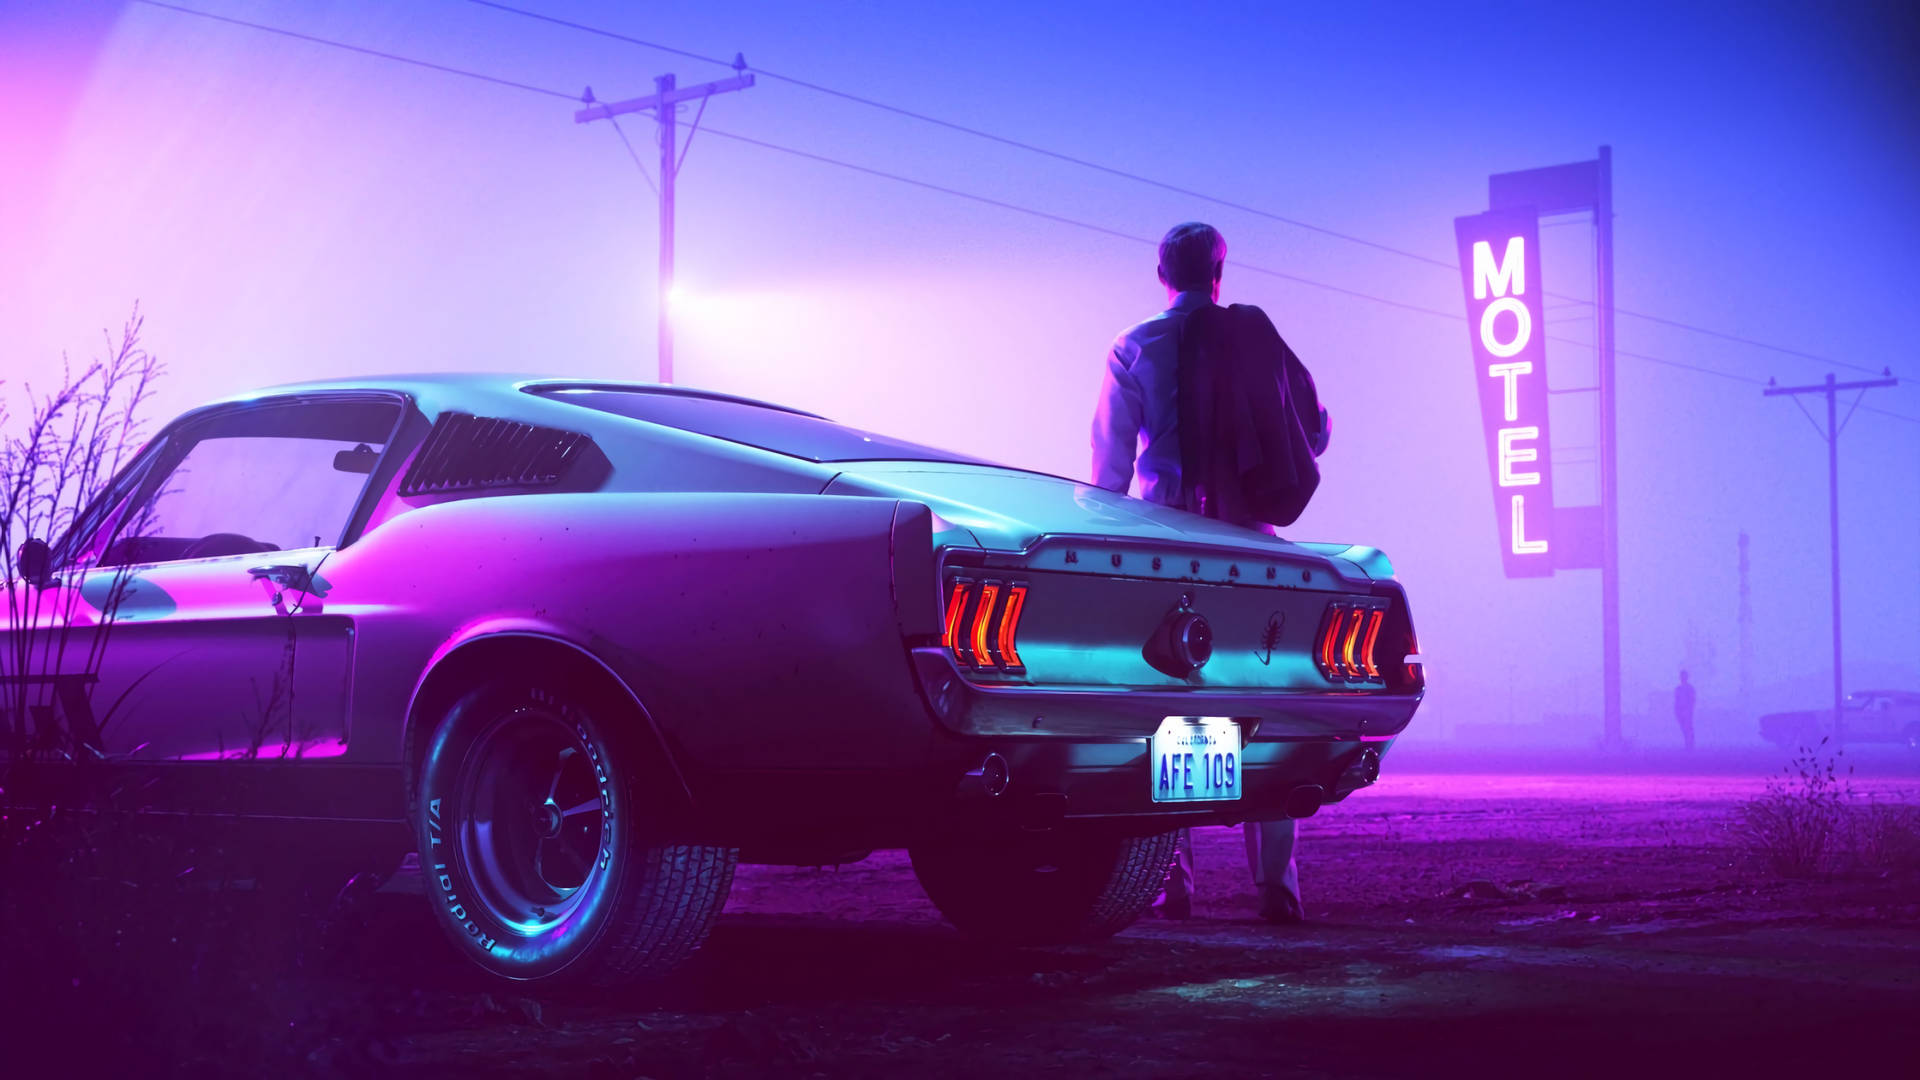 Neon Mustang Car Background